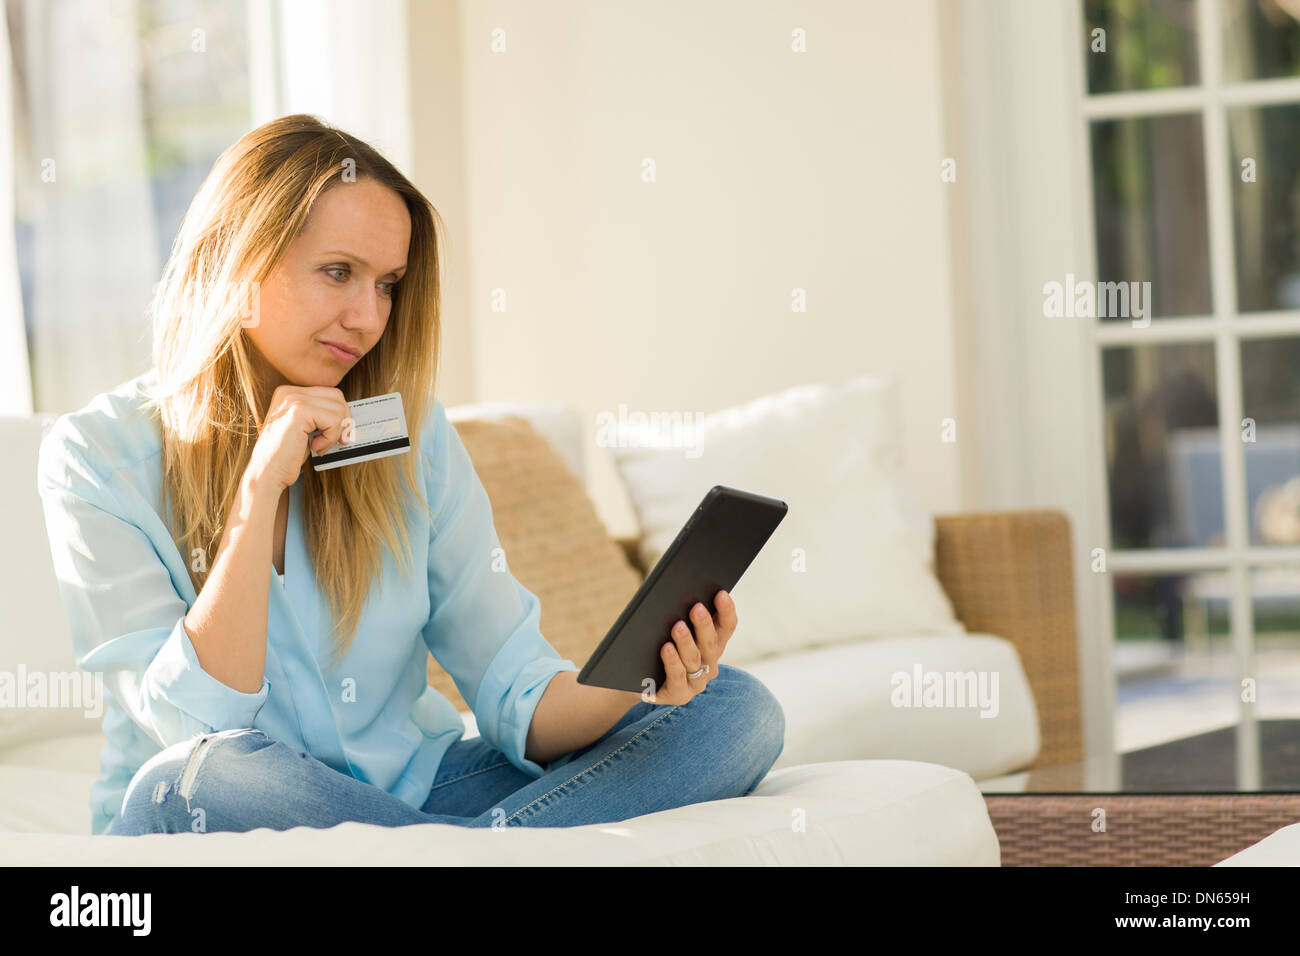 Caucasian woman shopping online with digital tablet Stock Photo